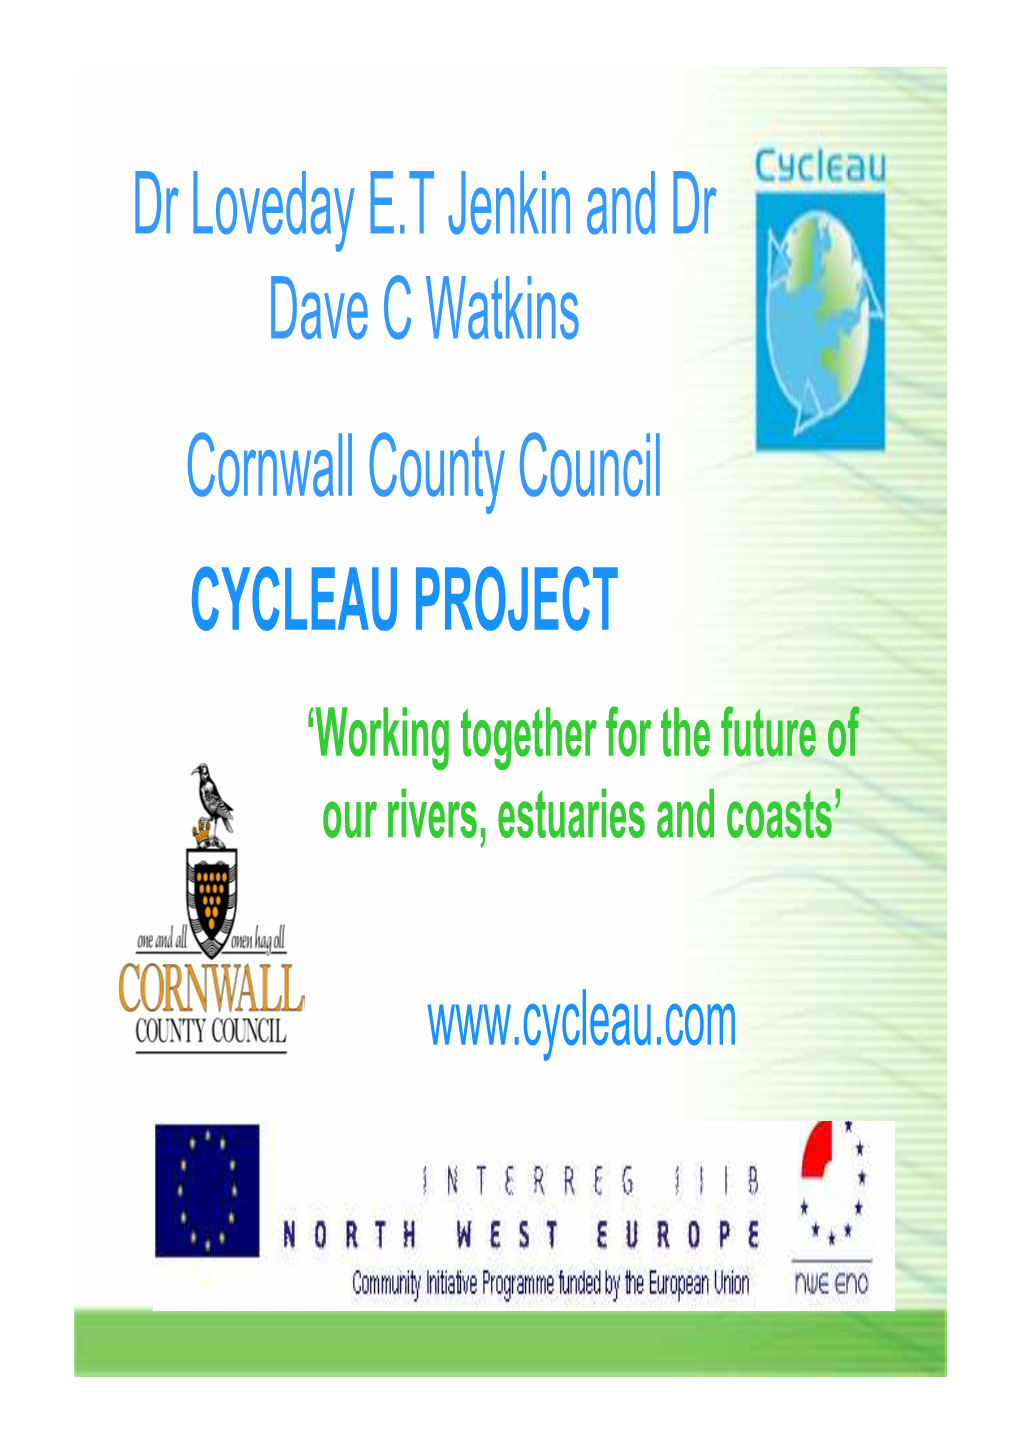 Dr Loveday E.T Jenkin and Dr Dave C Watkins Cornwall County Council CYCLEAU PROJECT ‘Working Together for the Future of Our Rivers, Estuaries and Coasts’